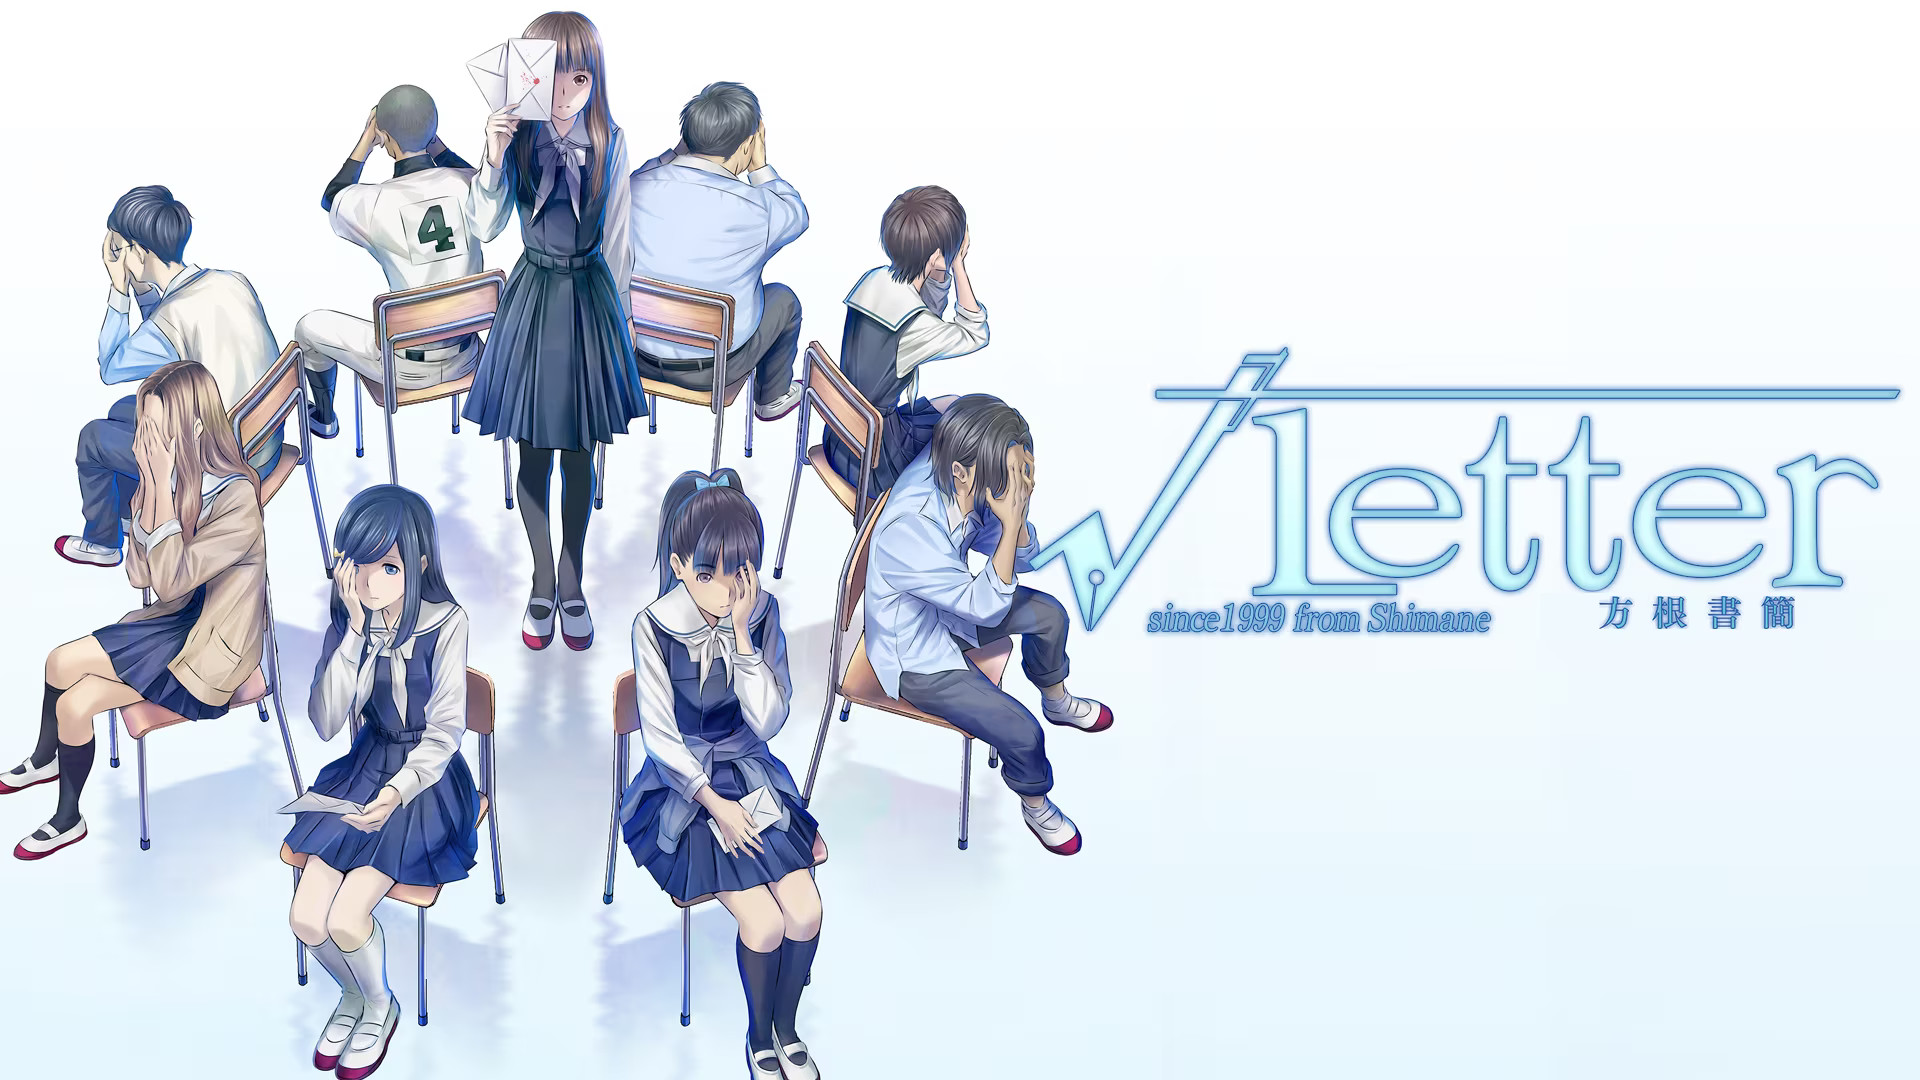 Another – Visual novel & other stuff impressions